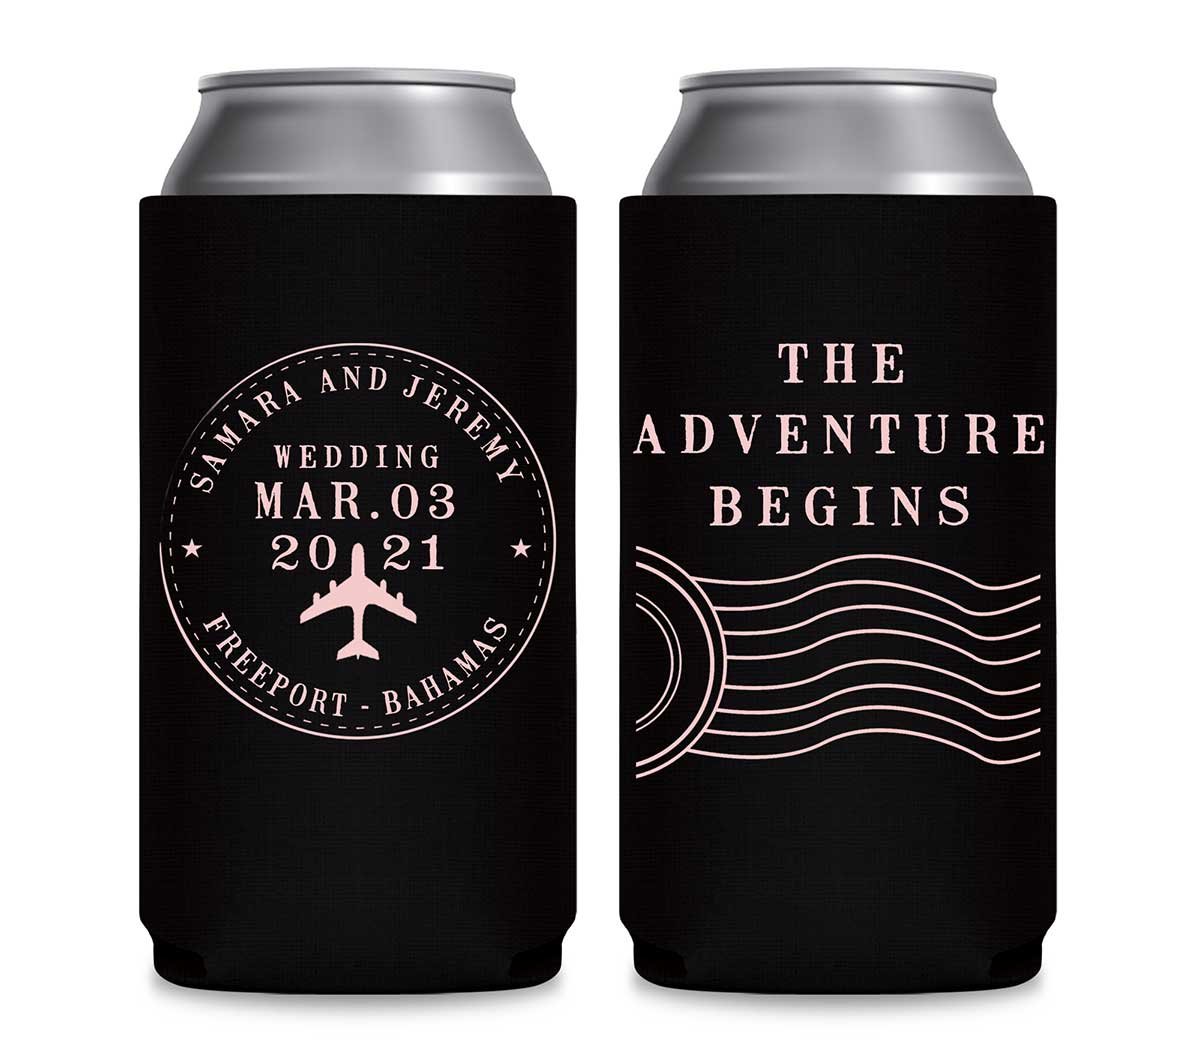 https://www.thatweddingshop.com/wp-content/uploads/2019/12/The-Adventure-Begins-2A-Collapsible-Foam-12oz-Slim-Can-Koozies-Personalized-Wedding-Favors.jpg